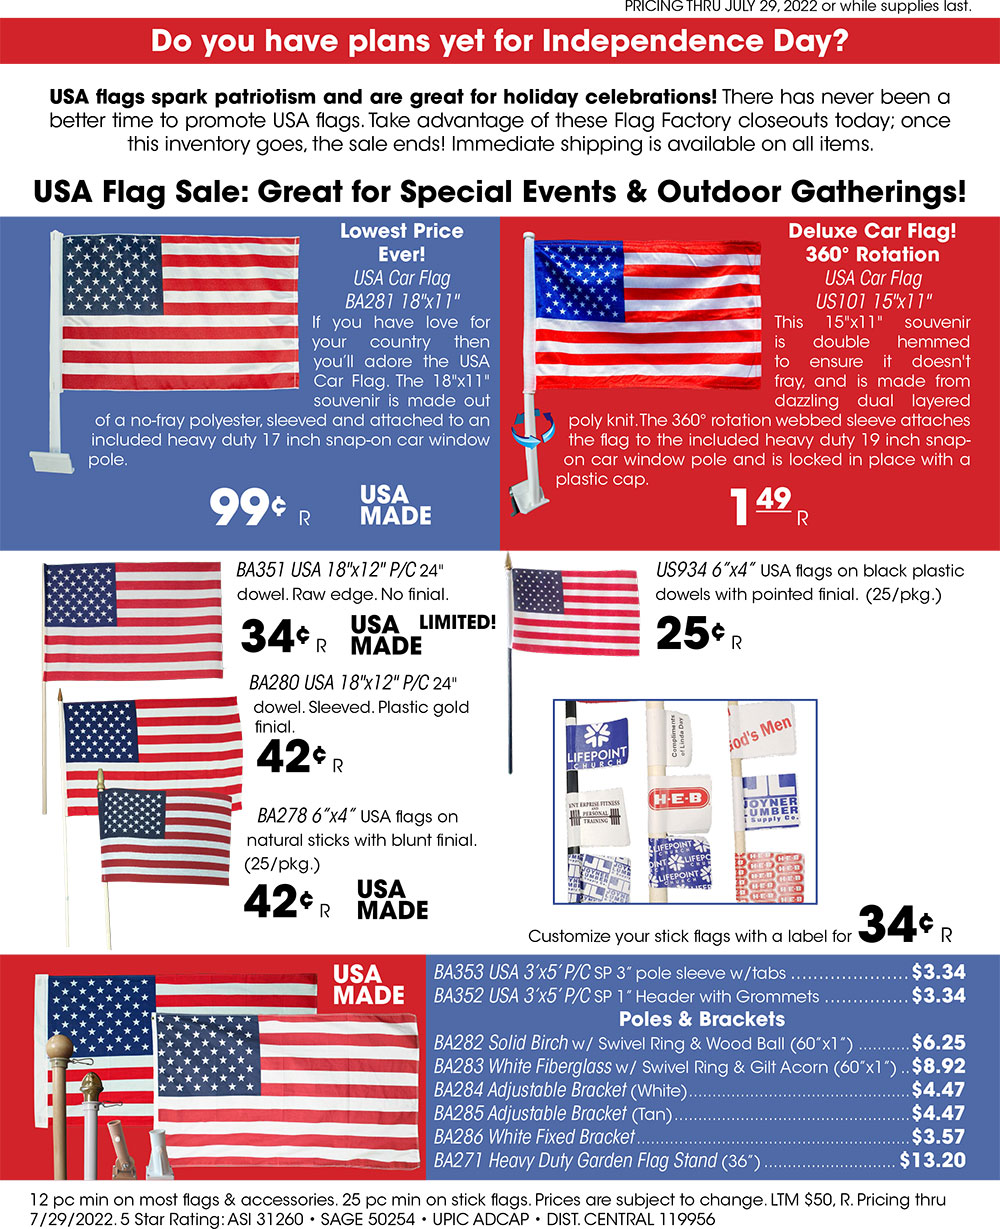 USA Flag Sale: Great for special events and outdoor gatherings! Flags as low as 25¢